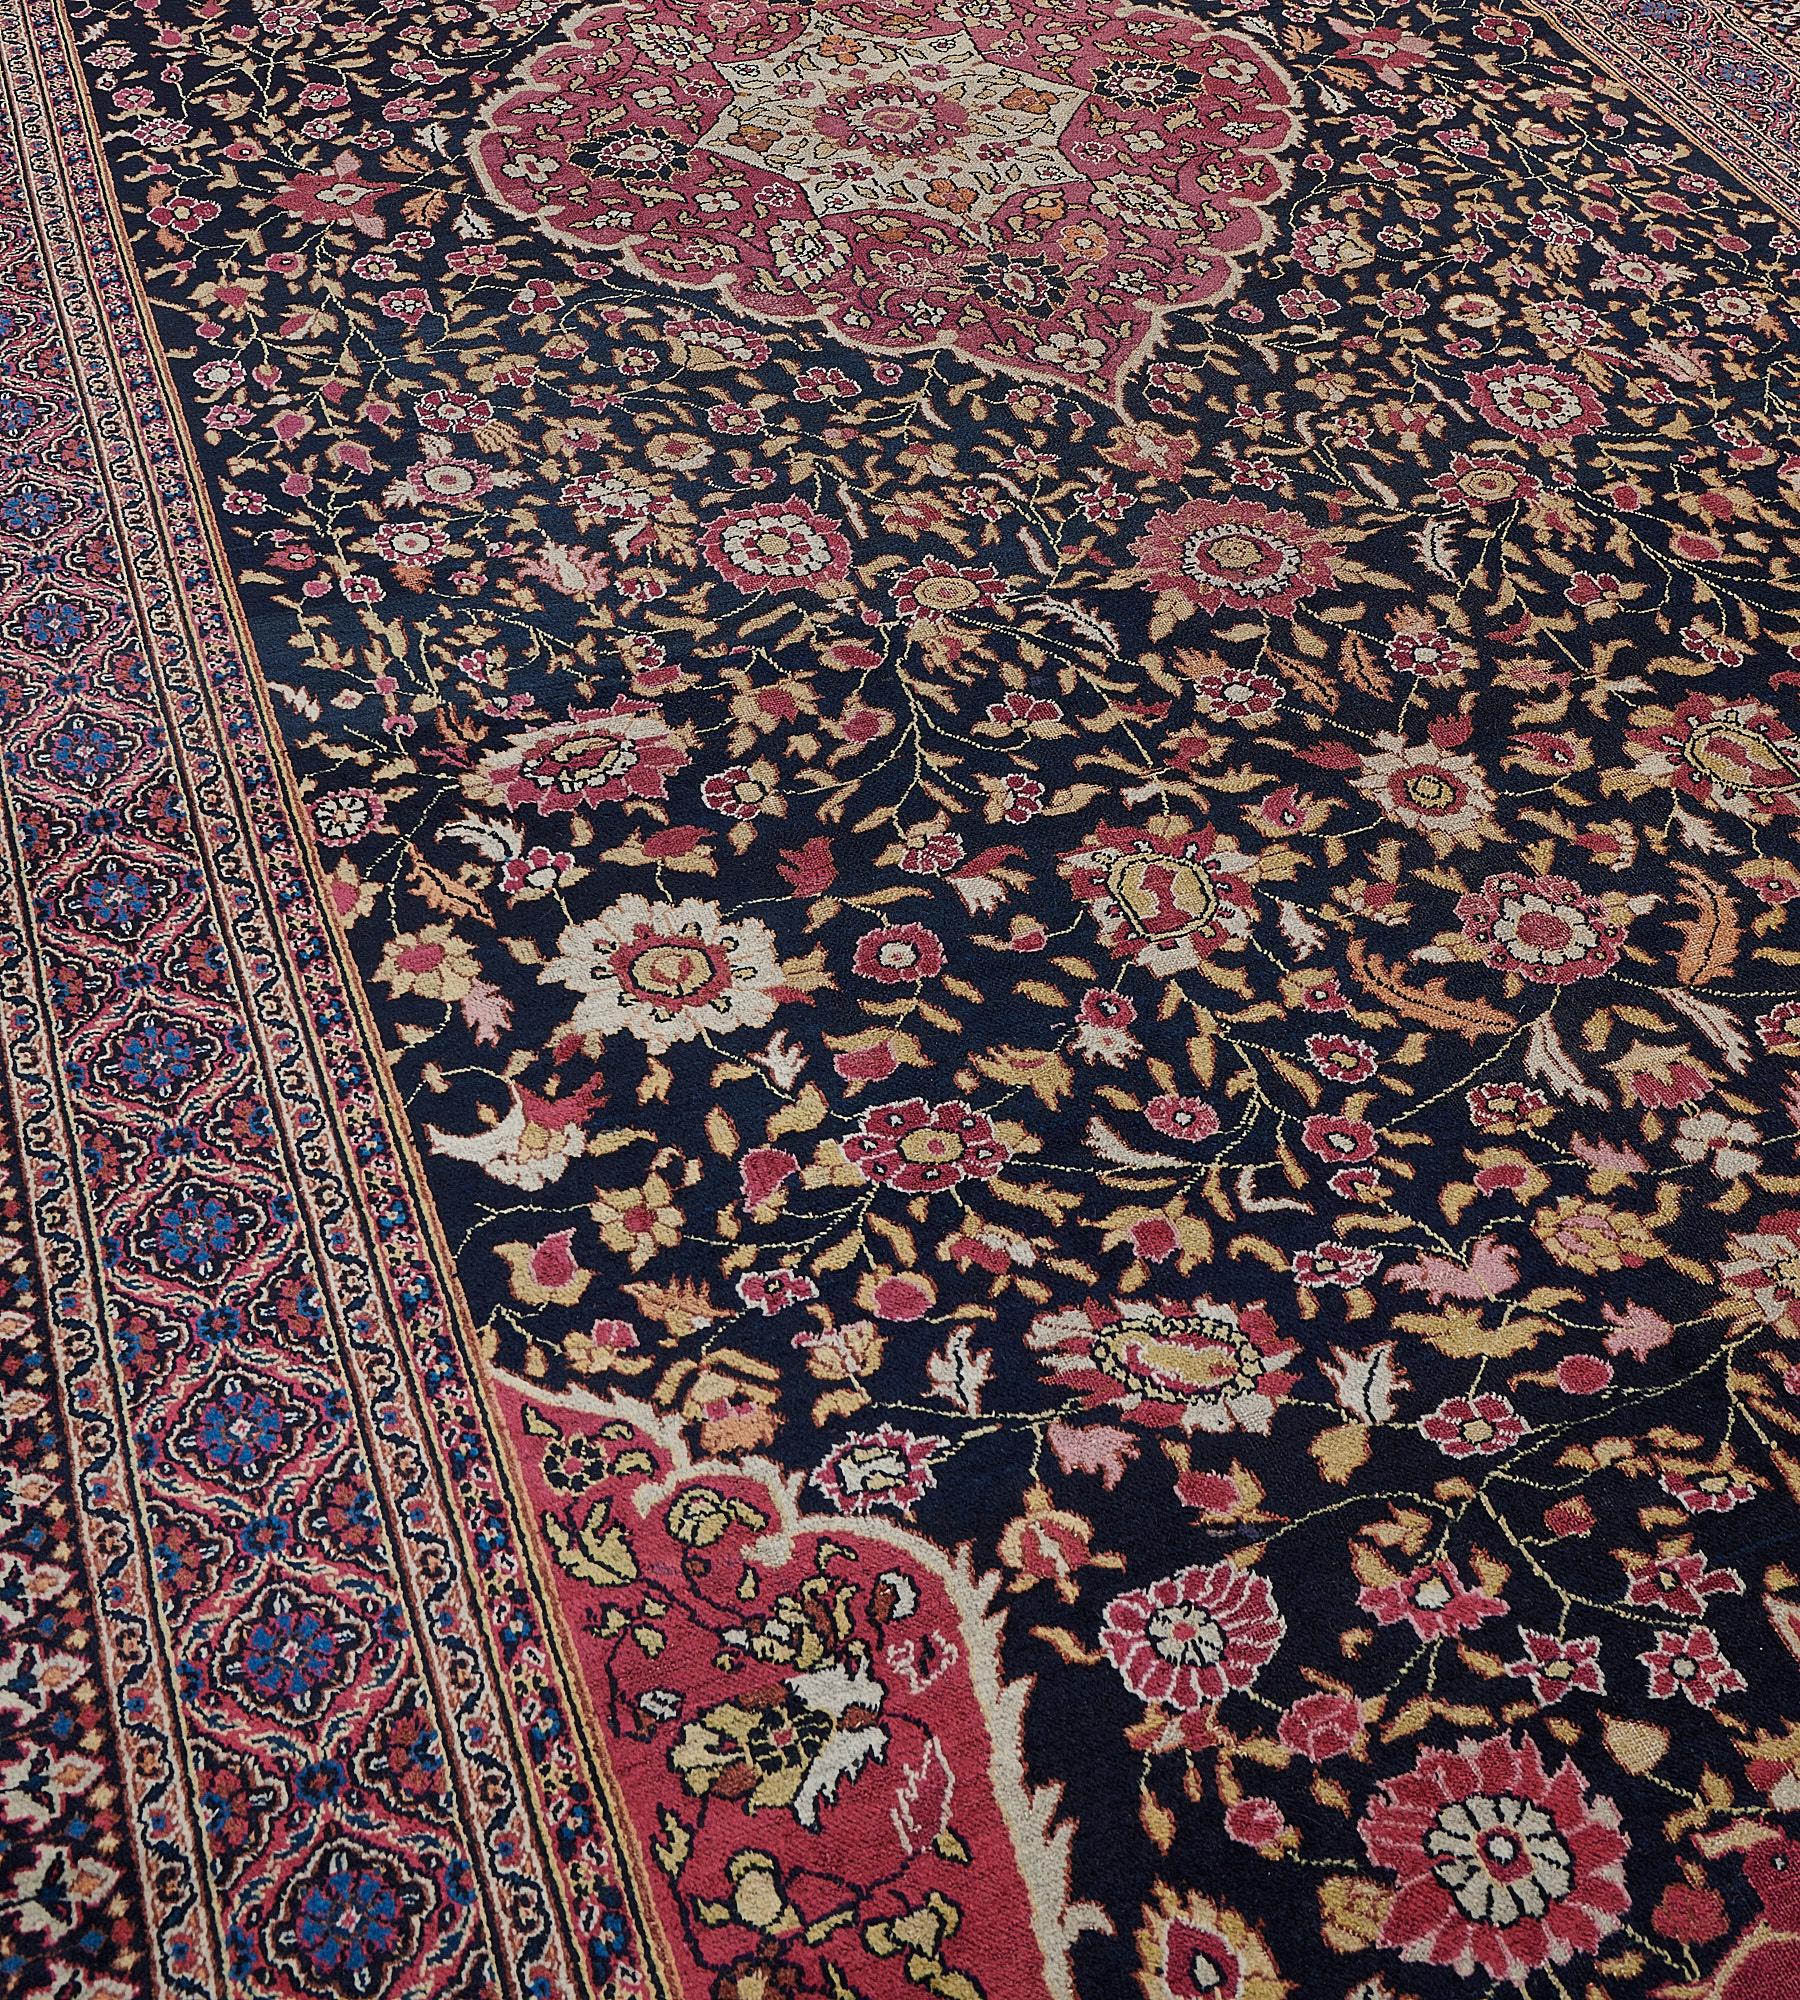 This handwoven antique, circa 1880, Khorassan rug has a charcoal-black field with a dense polychrome floral vine around a shaded raspberry-red cusped medallion with palmette pendants the ivory central stellar-flowerhead lozenge containing floral